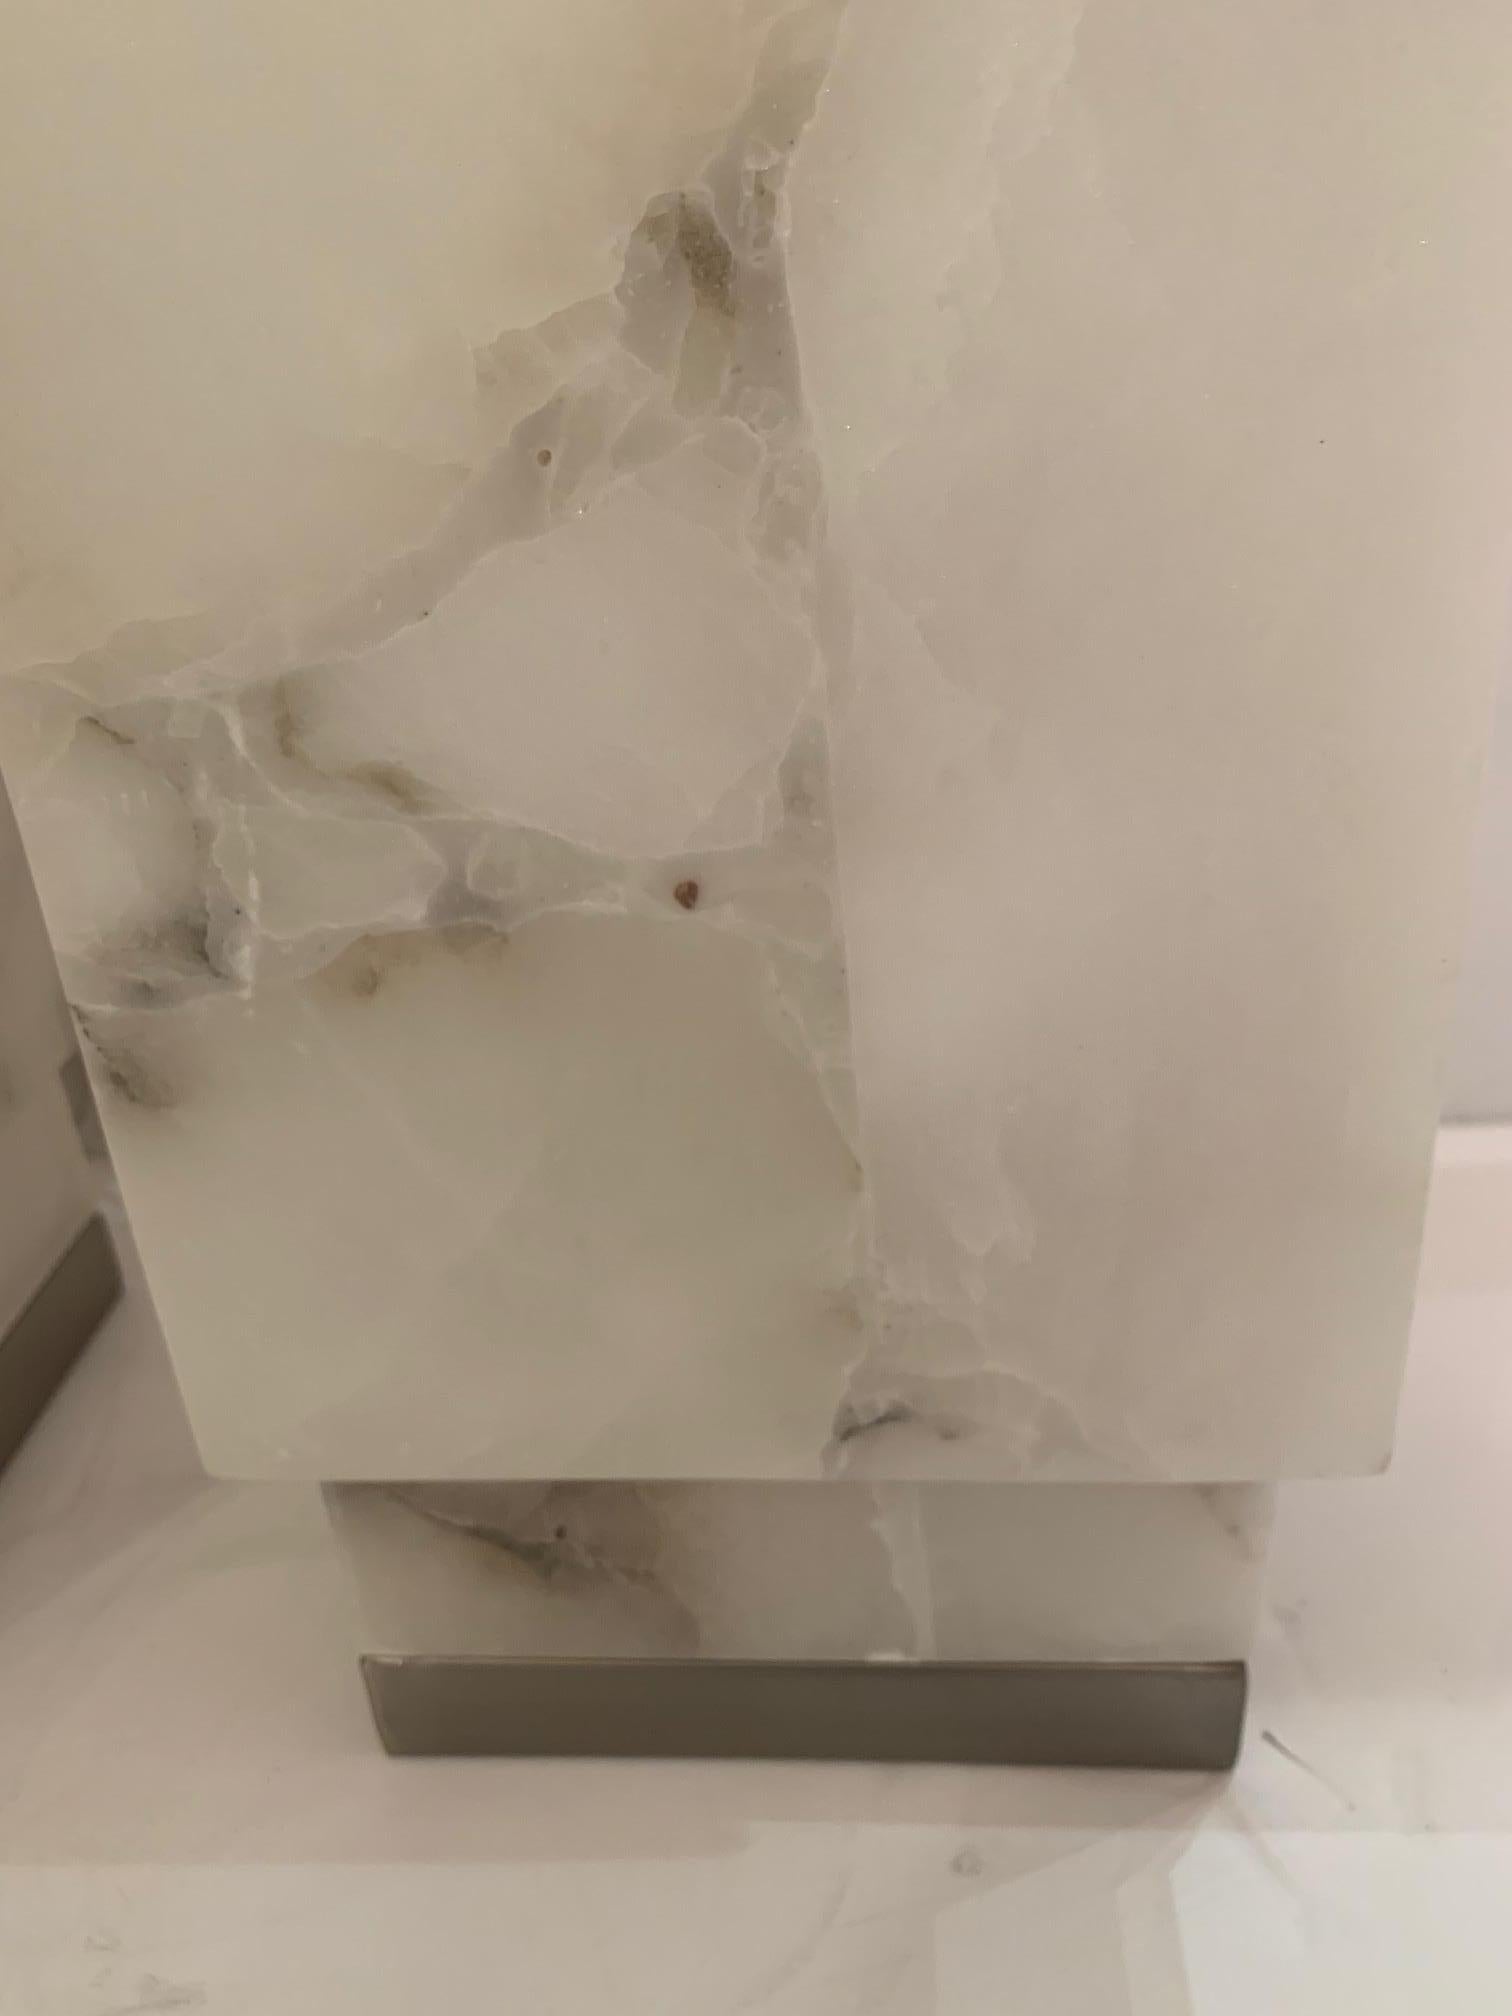 Glamorous mid century modern marble square columnar table lamp having a white and gray palette and chrome base.  Like a modern piece of sculpture that adds a glow to a special spot in a room.